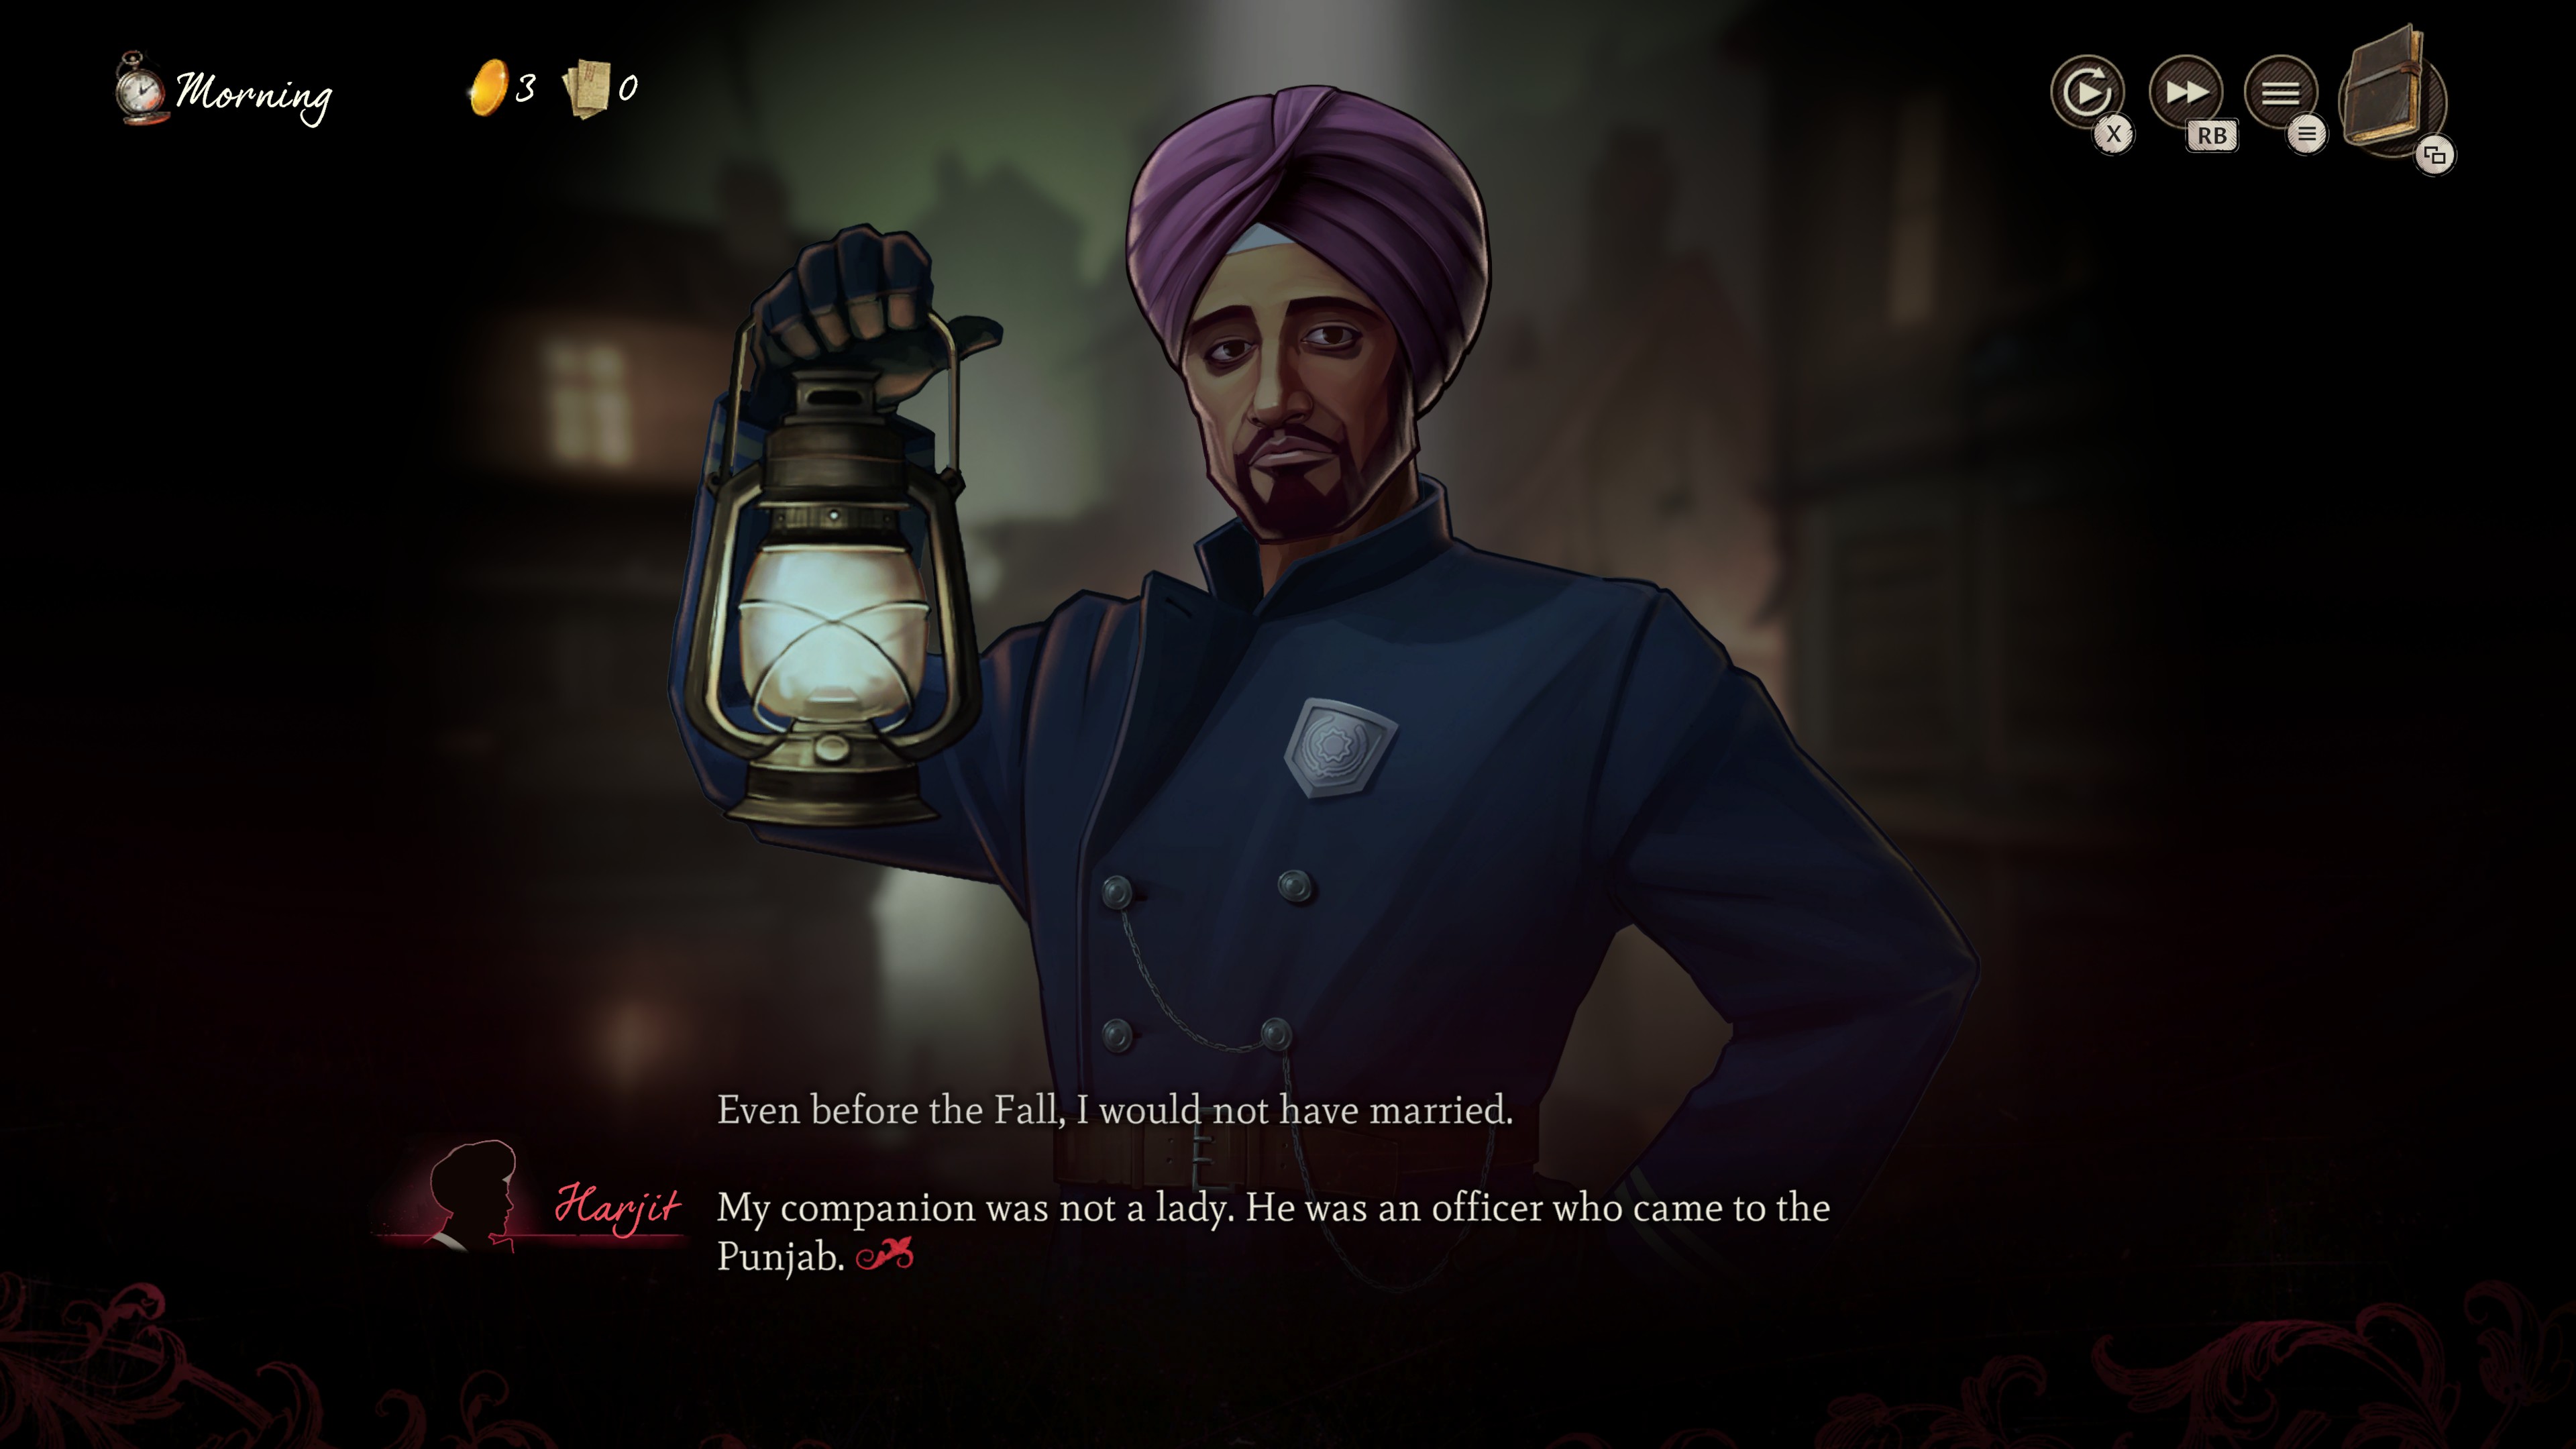 A chat with Harjit, an Indian police constable, in Mask of the Rose.